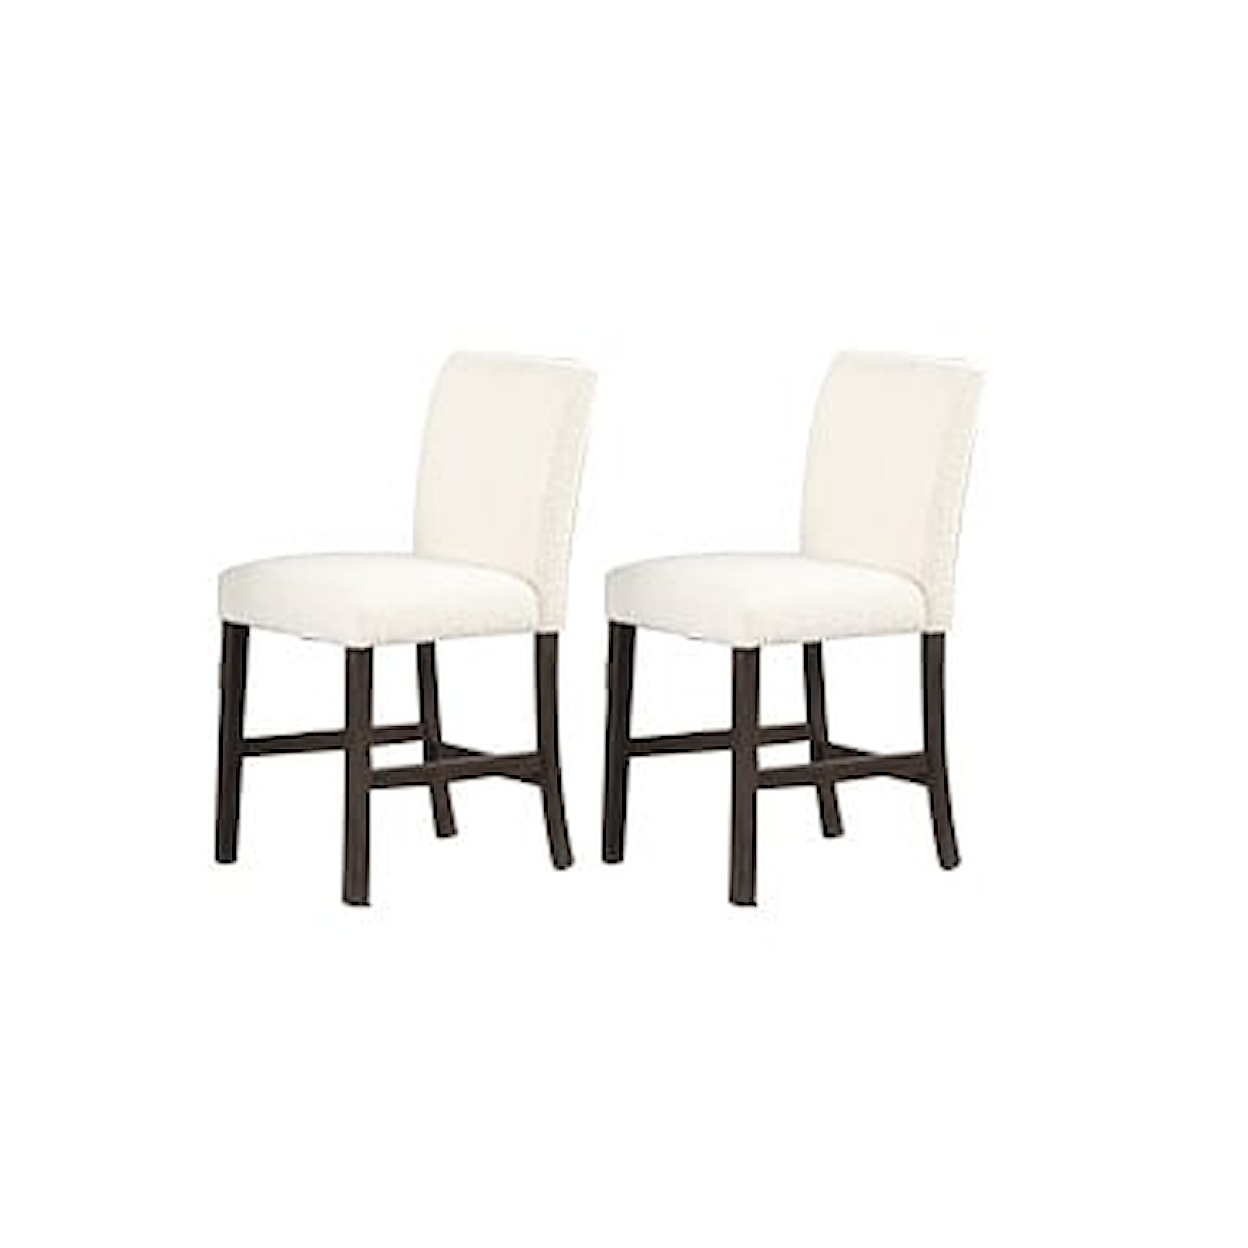 New Classic High Line Dining Chair